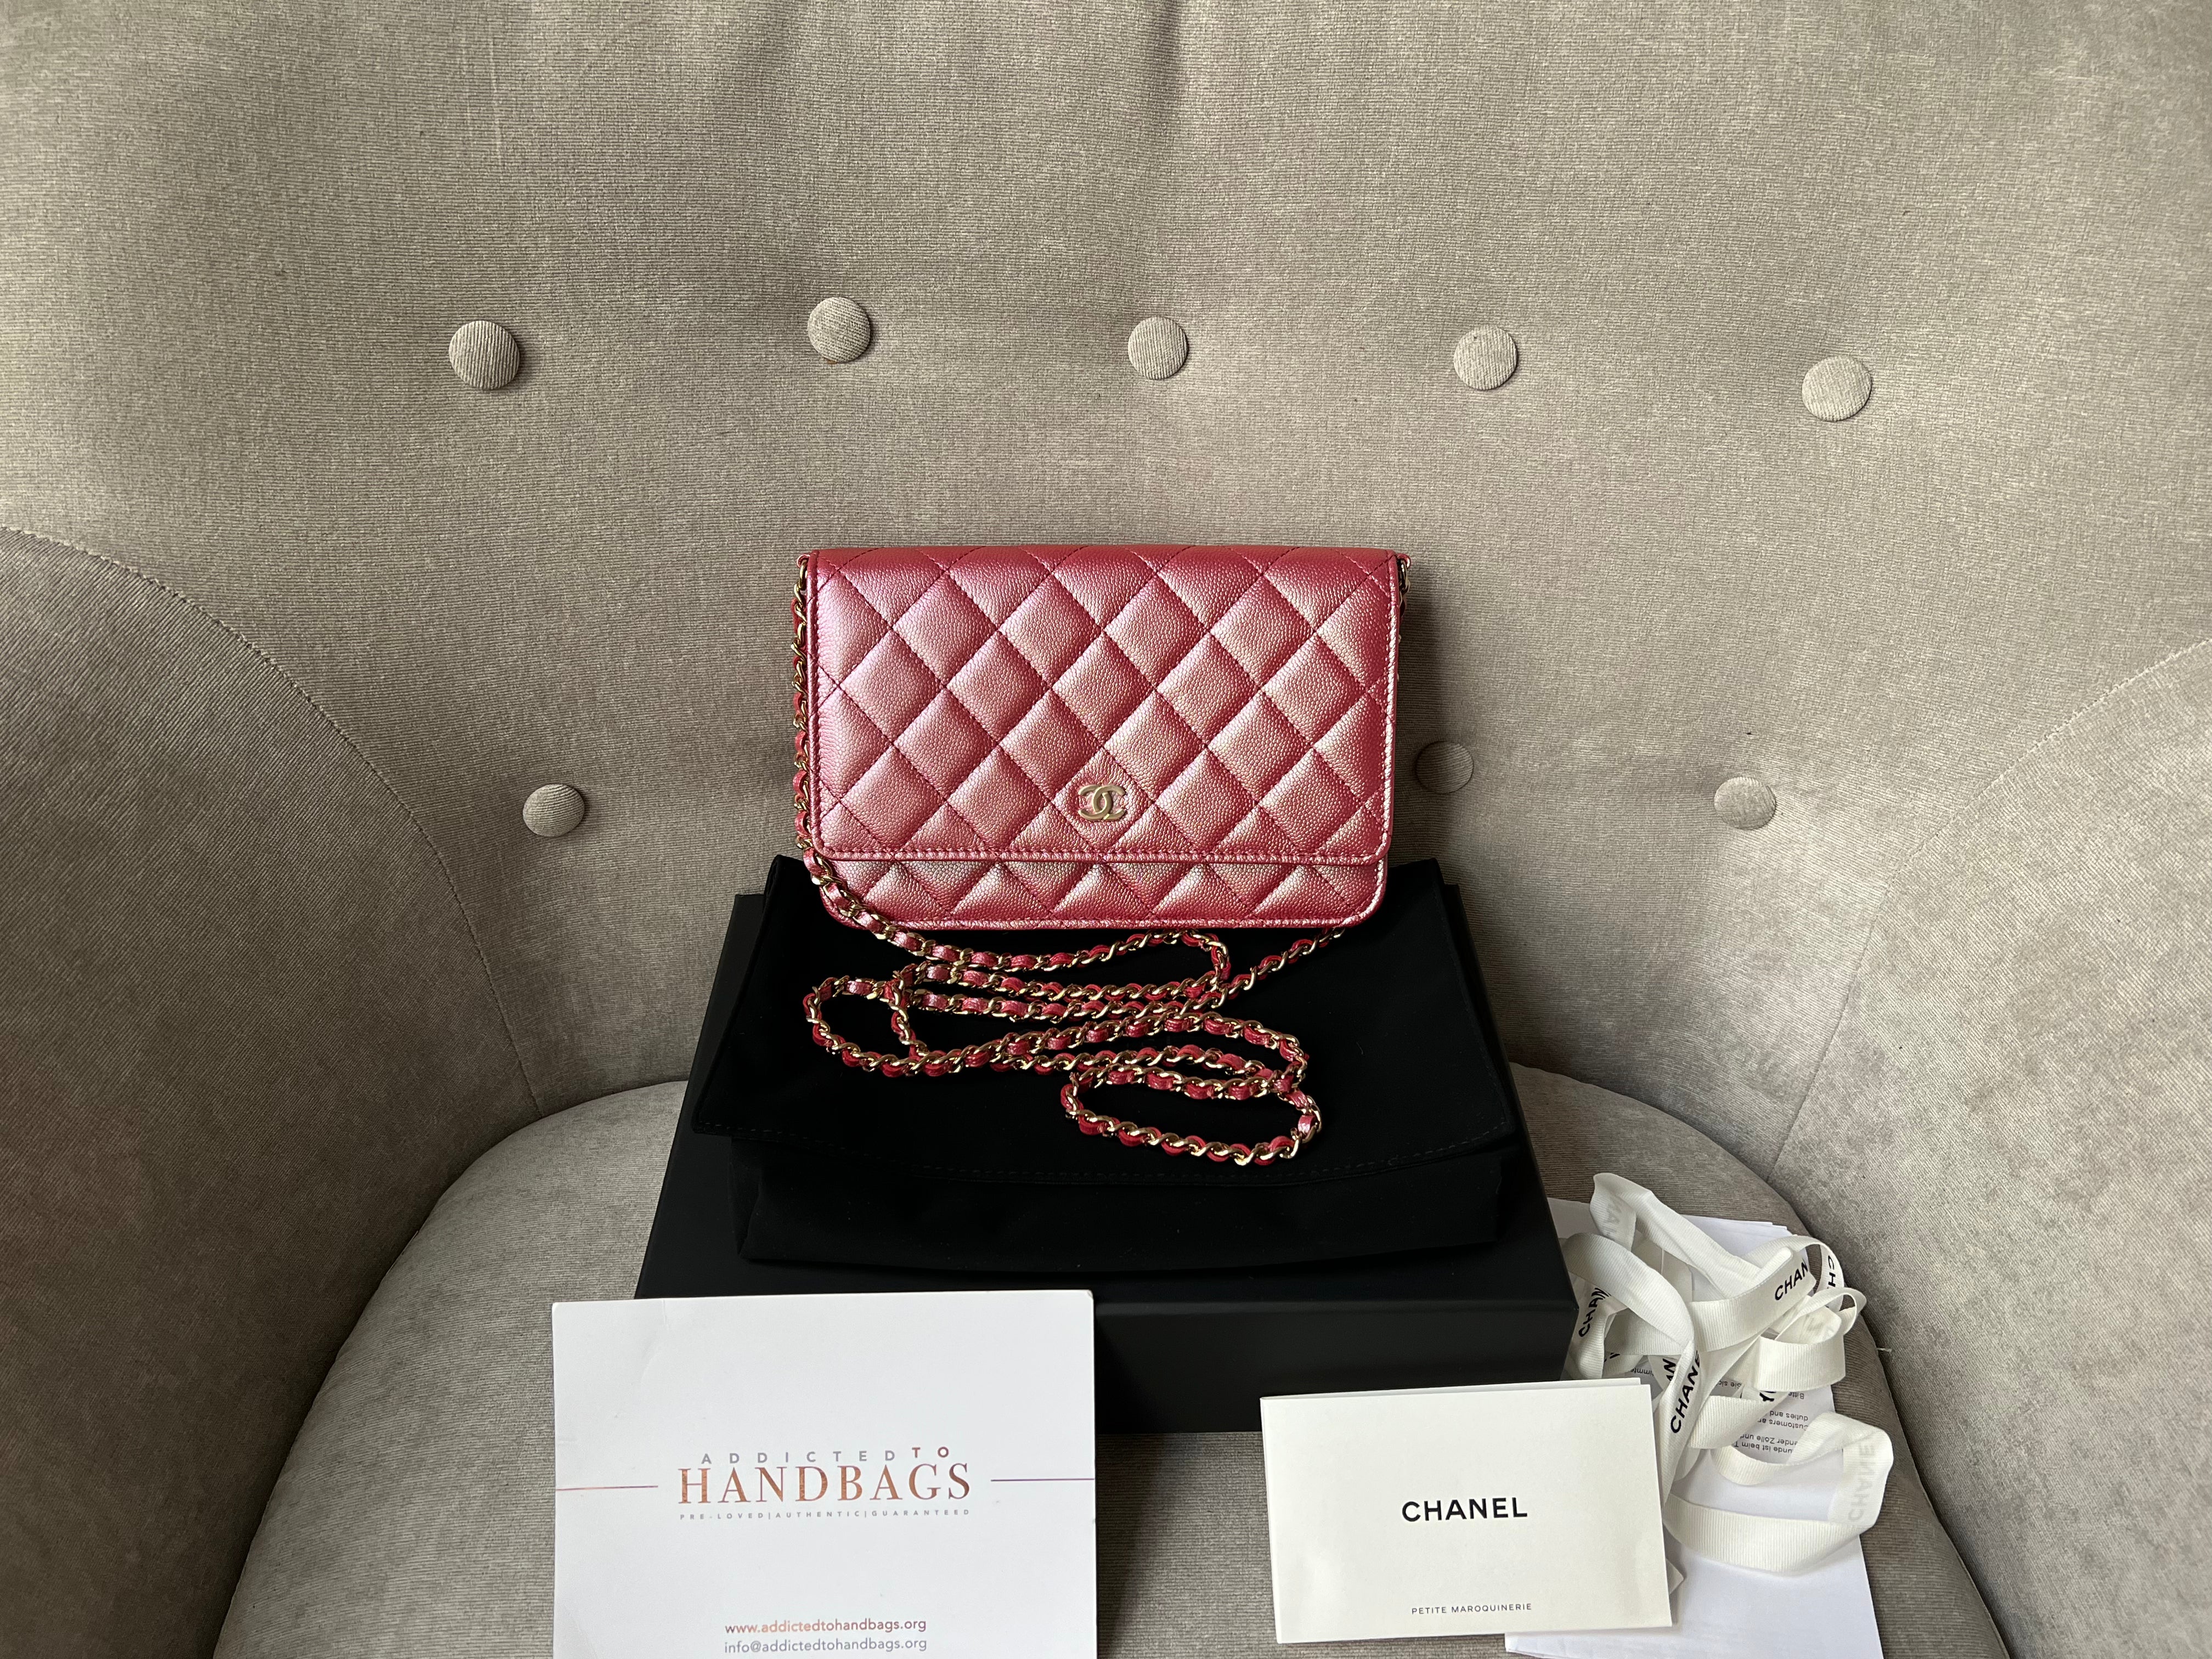 Chanel Quilted Wallet on Chain WOC Pink Caviar Gold Hardware 22S